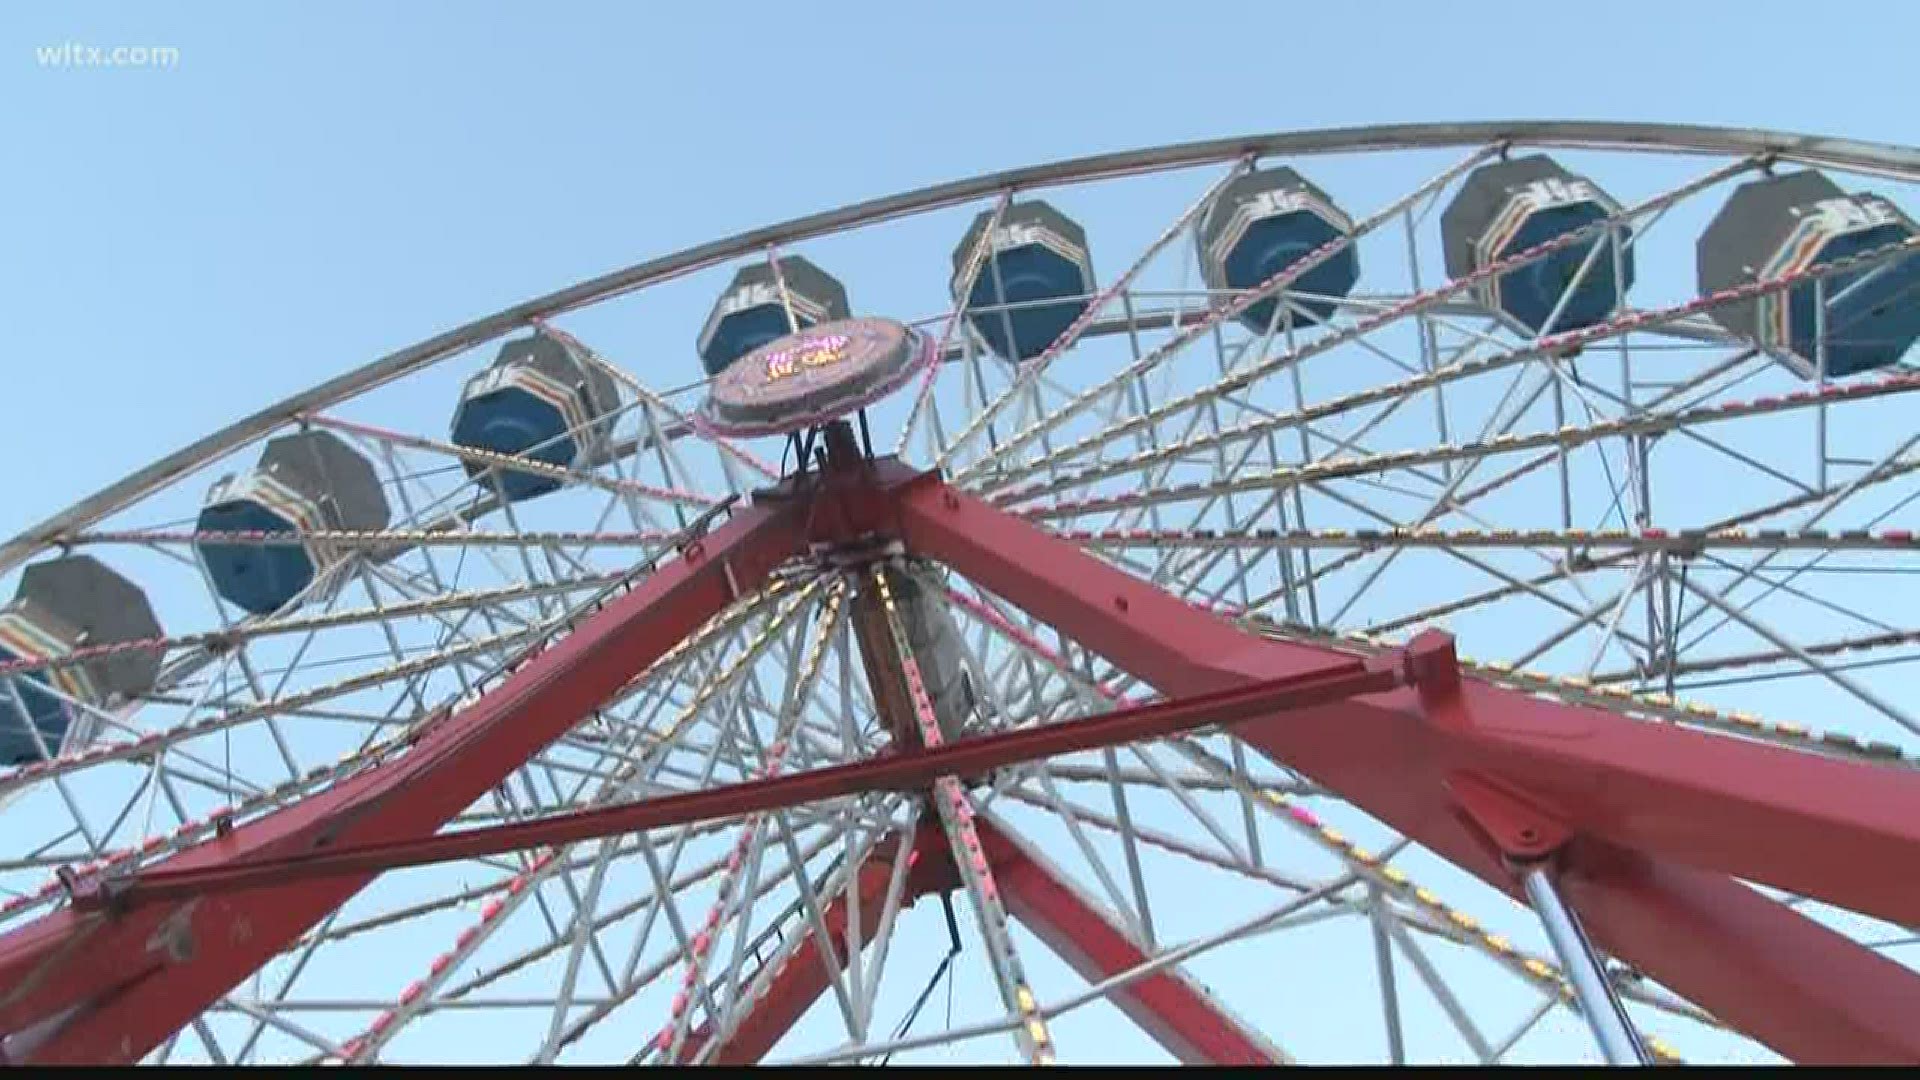 According to organizers, the annual Sumter American Legion Fair has been canceled for 2020